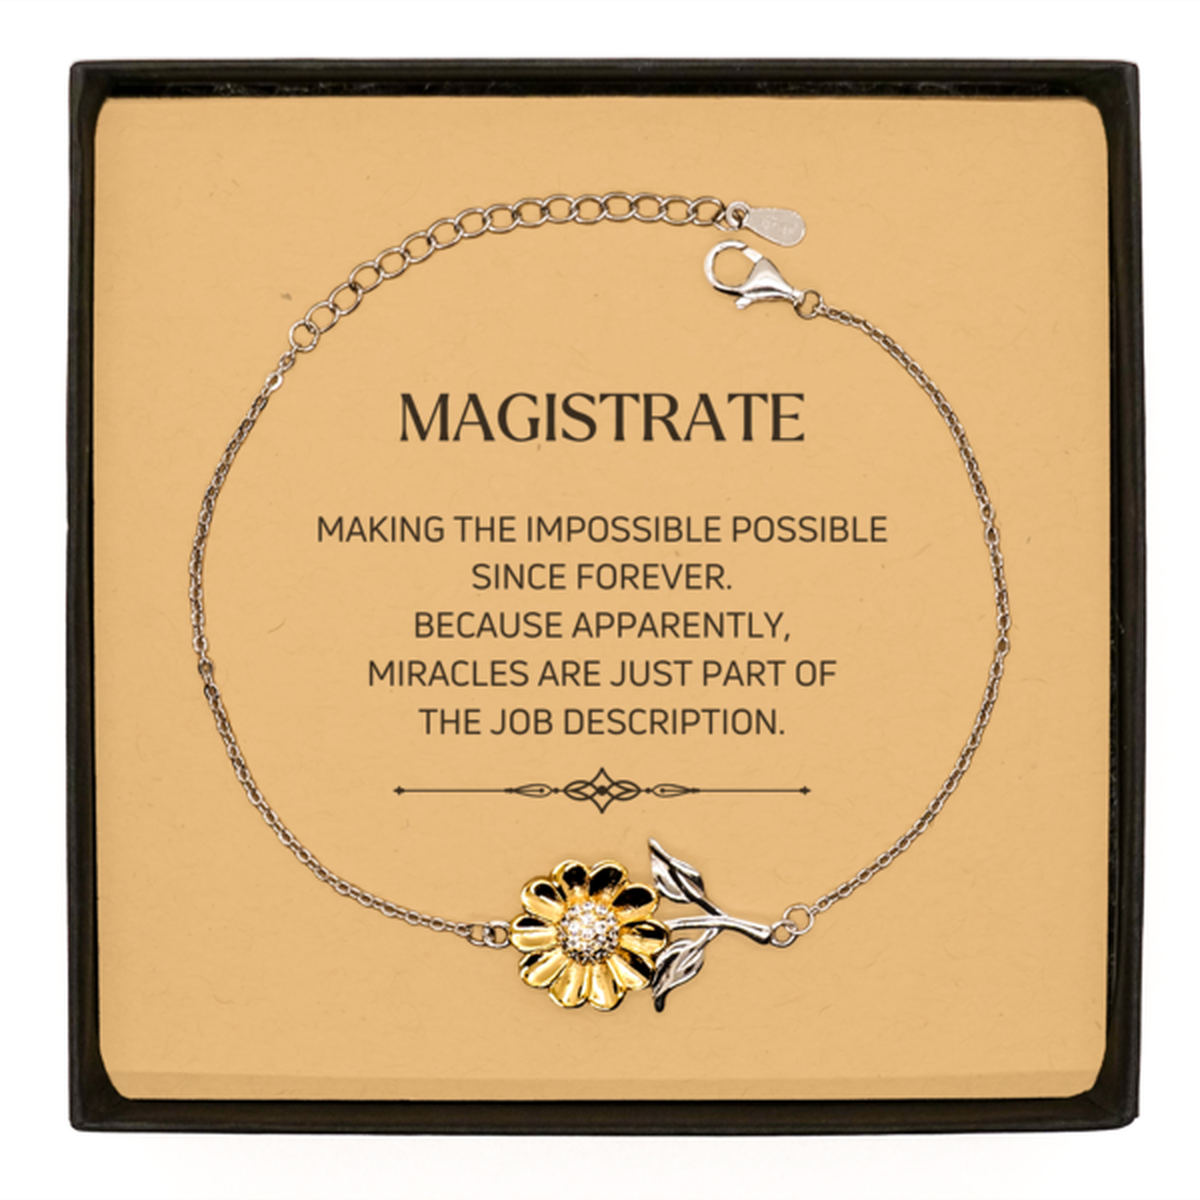 Funny Magistrate Gifts, Miracles are just part of the job description, Inspirational Birthday Sunflower Bracelet For Magistrate, Men, Women, Coworkers, Friends, Boss